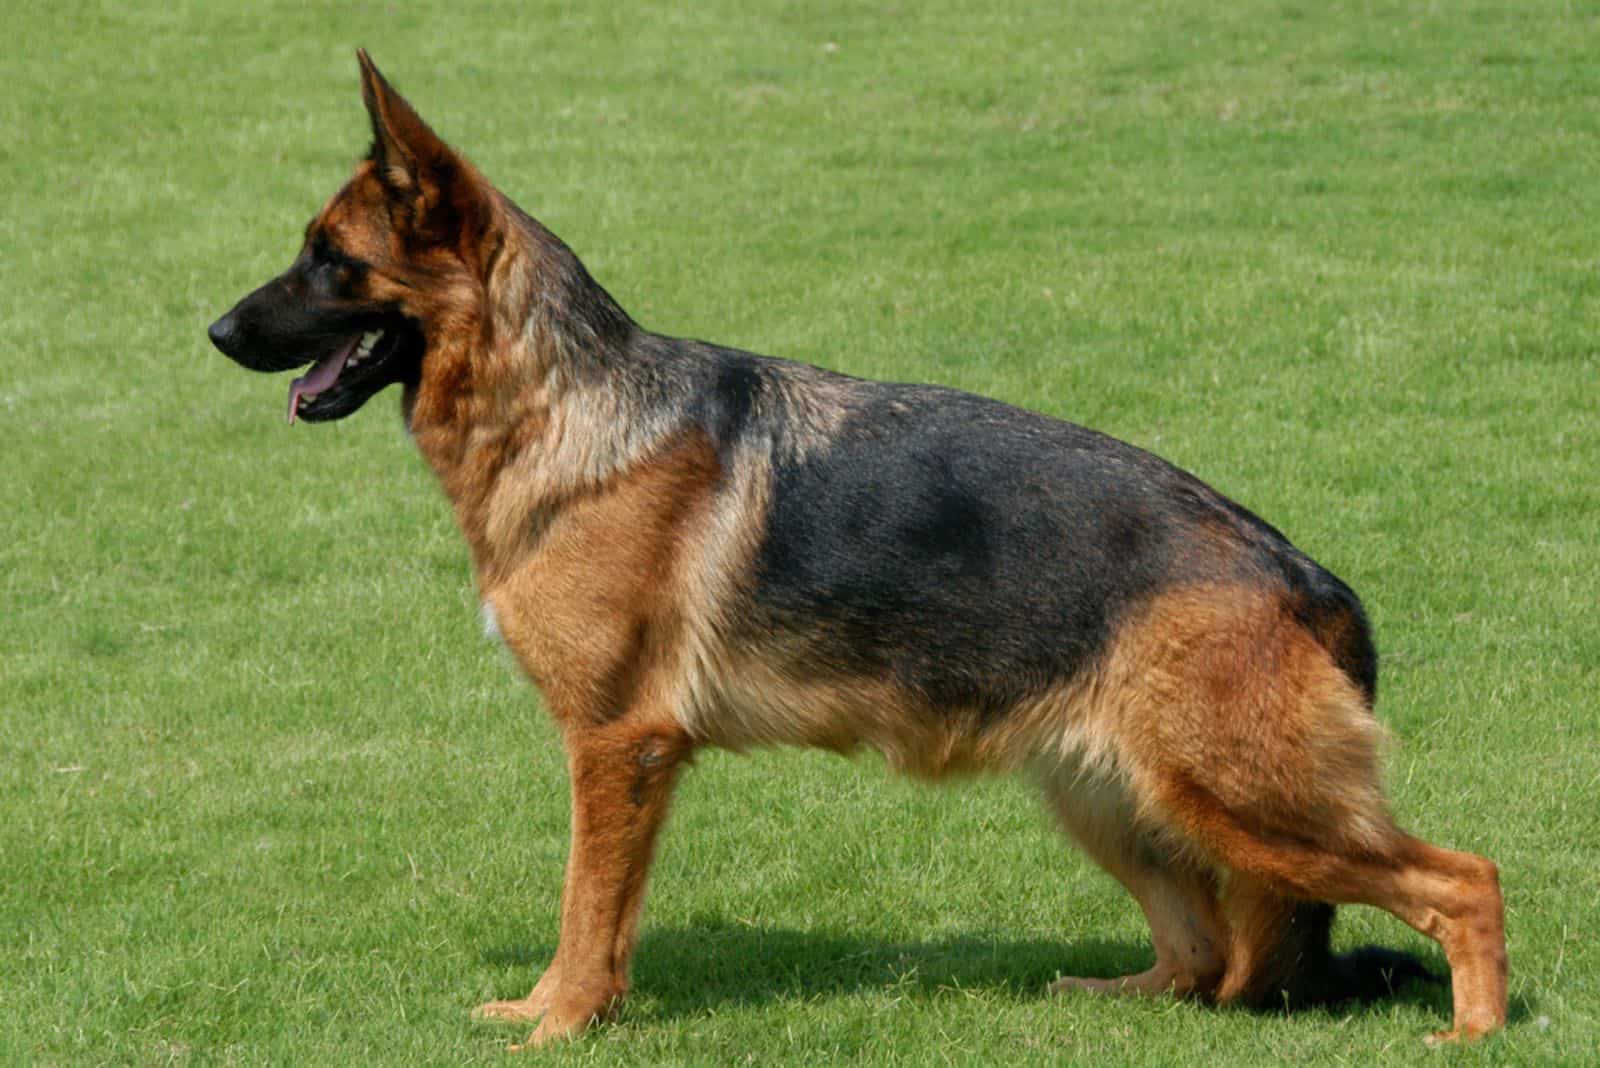 Pure breed champion German shepherd dog in show stand on green grass